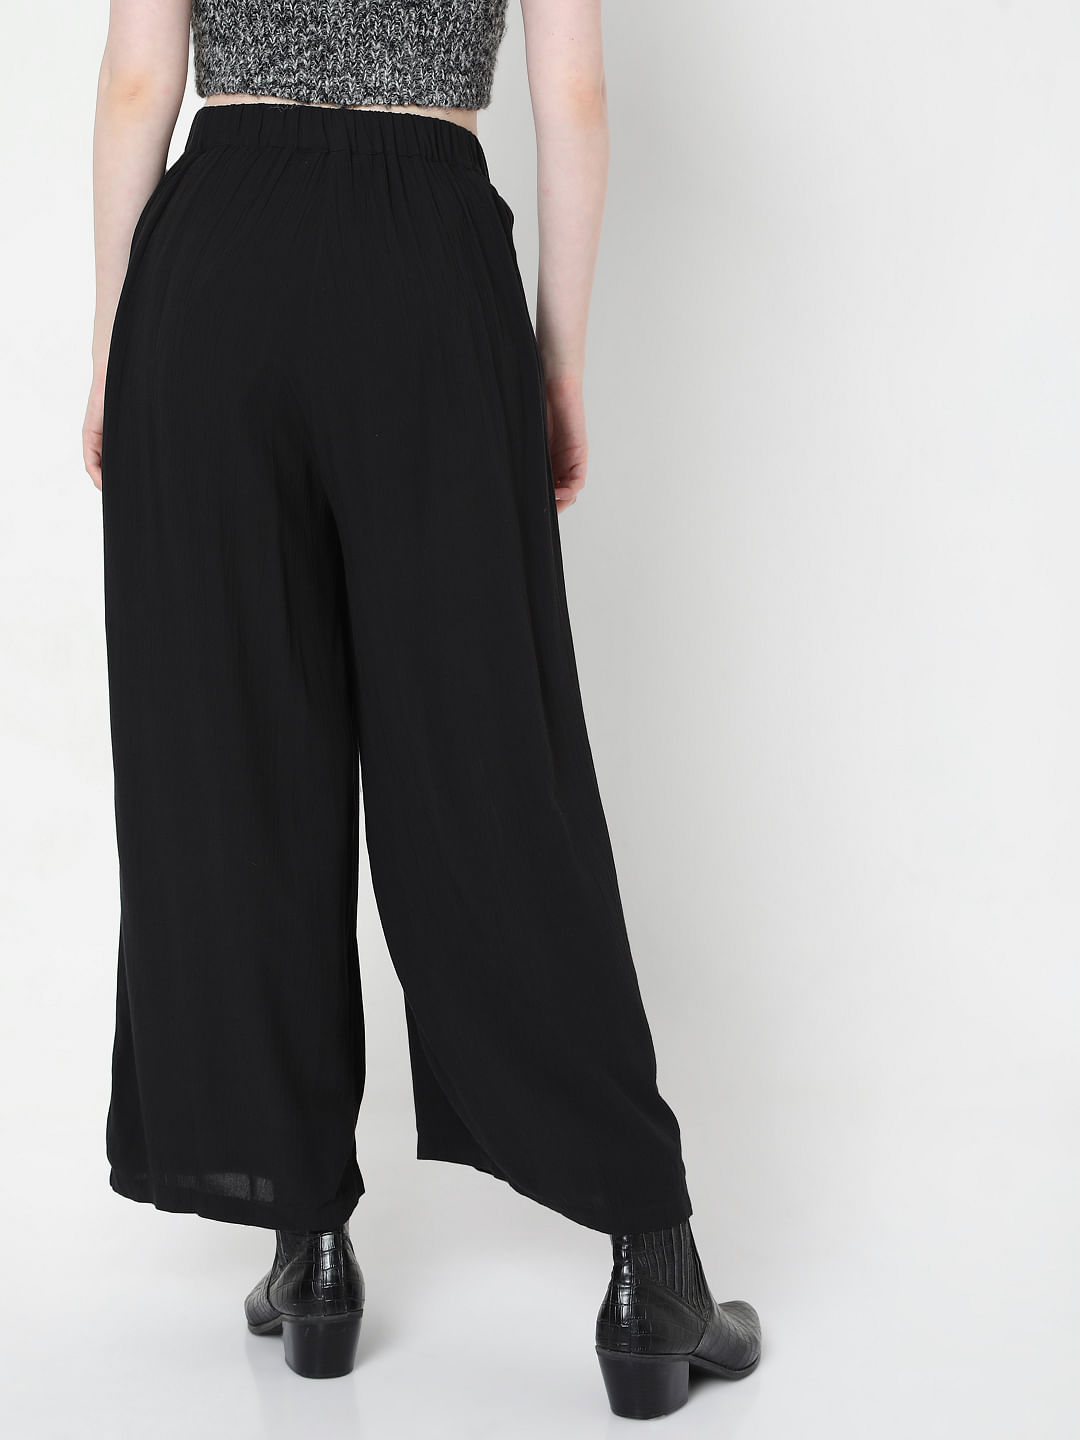 Lovely High Waist Palazzo Attire For Parties Retrouvez une sélec… | Palazzo  Pants Outfit | Palazzo And Crop Top, Palazzo Flared Pants, Palazzo For  Ladies